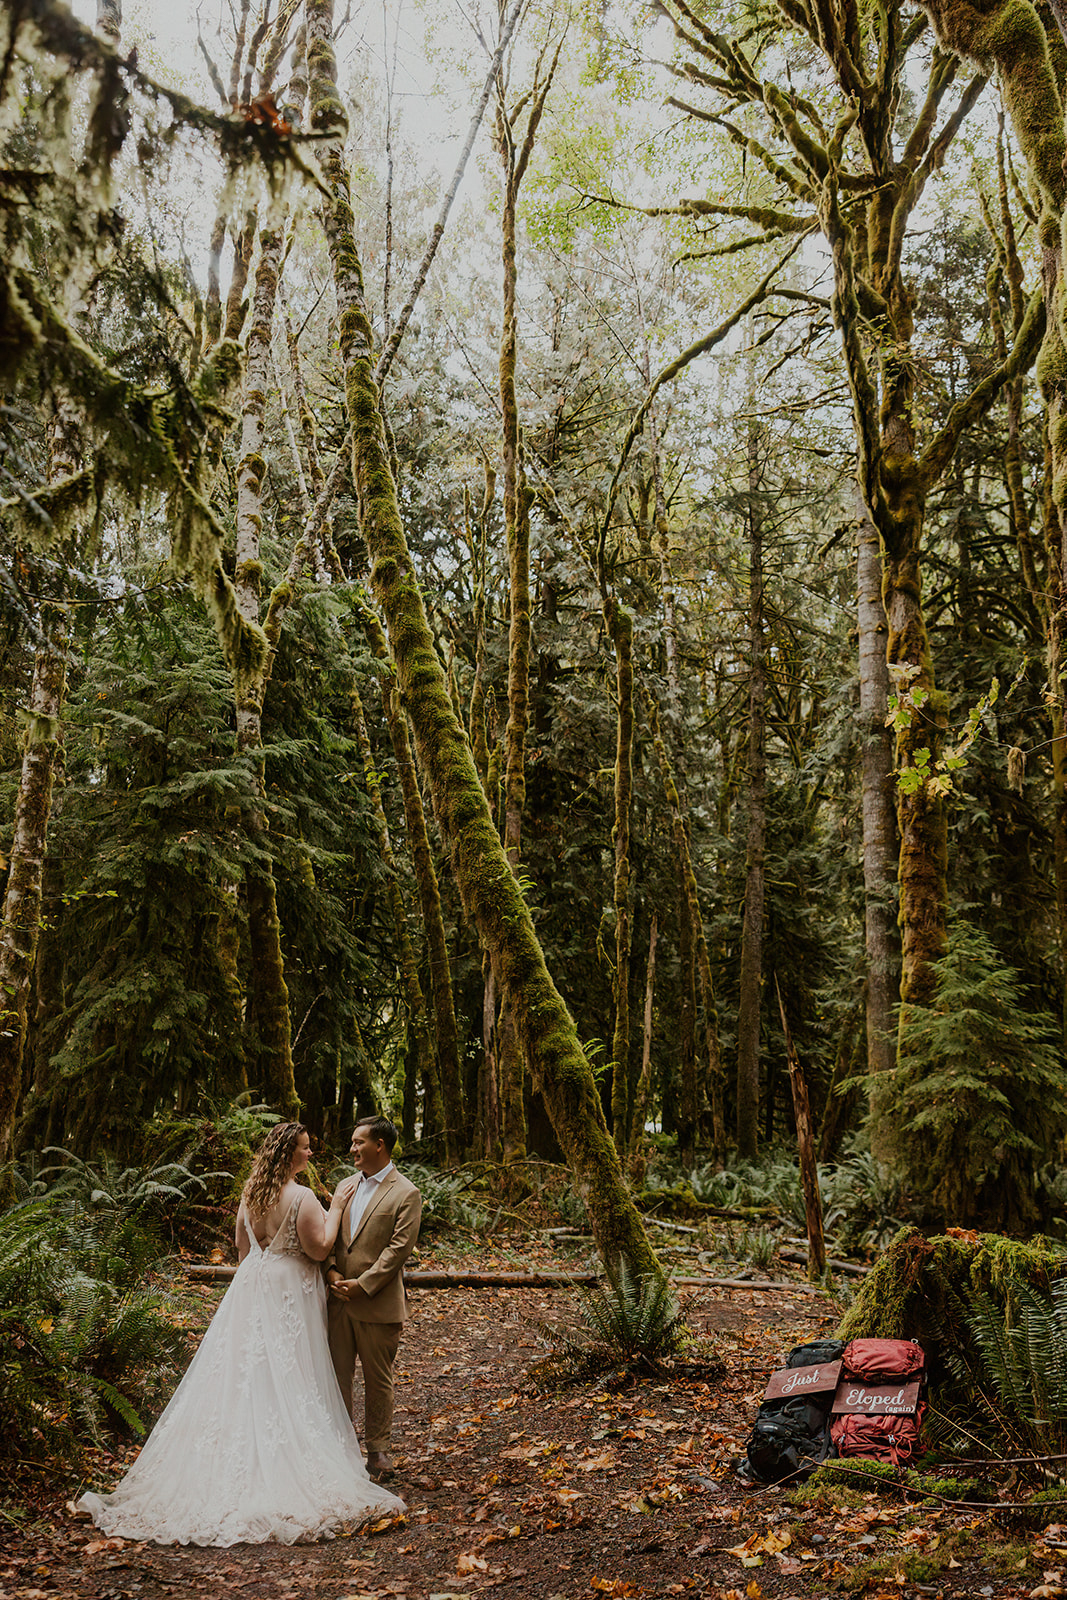 Olympic National Park elopement, backpacks with "just eloped" signs